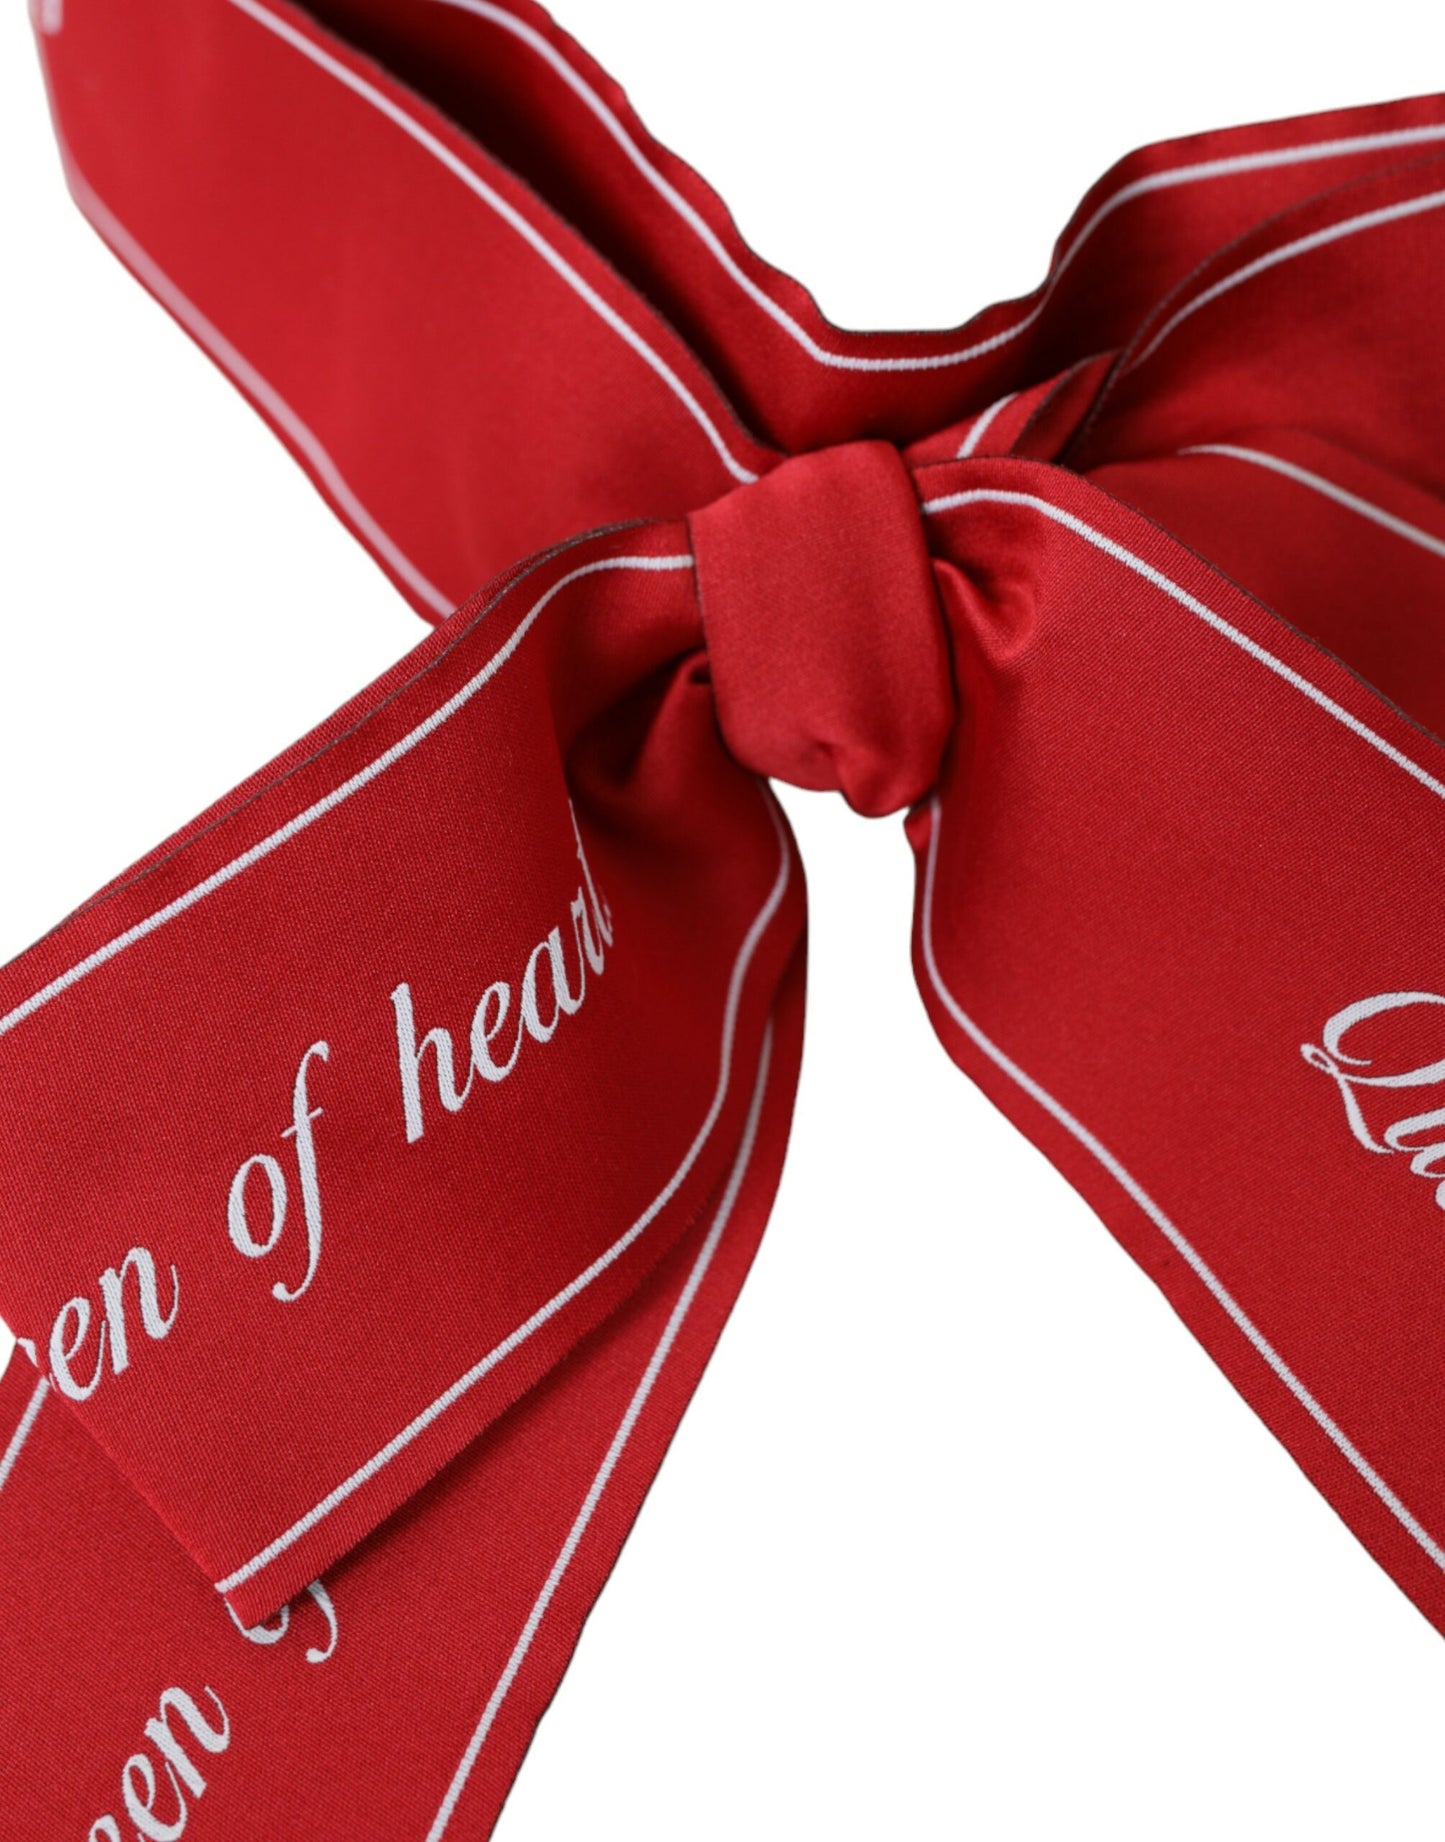 Red Polyester QUEEN OF HEARTS Belt